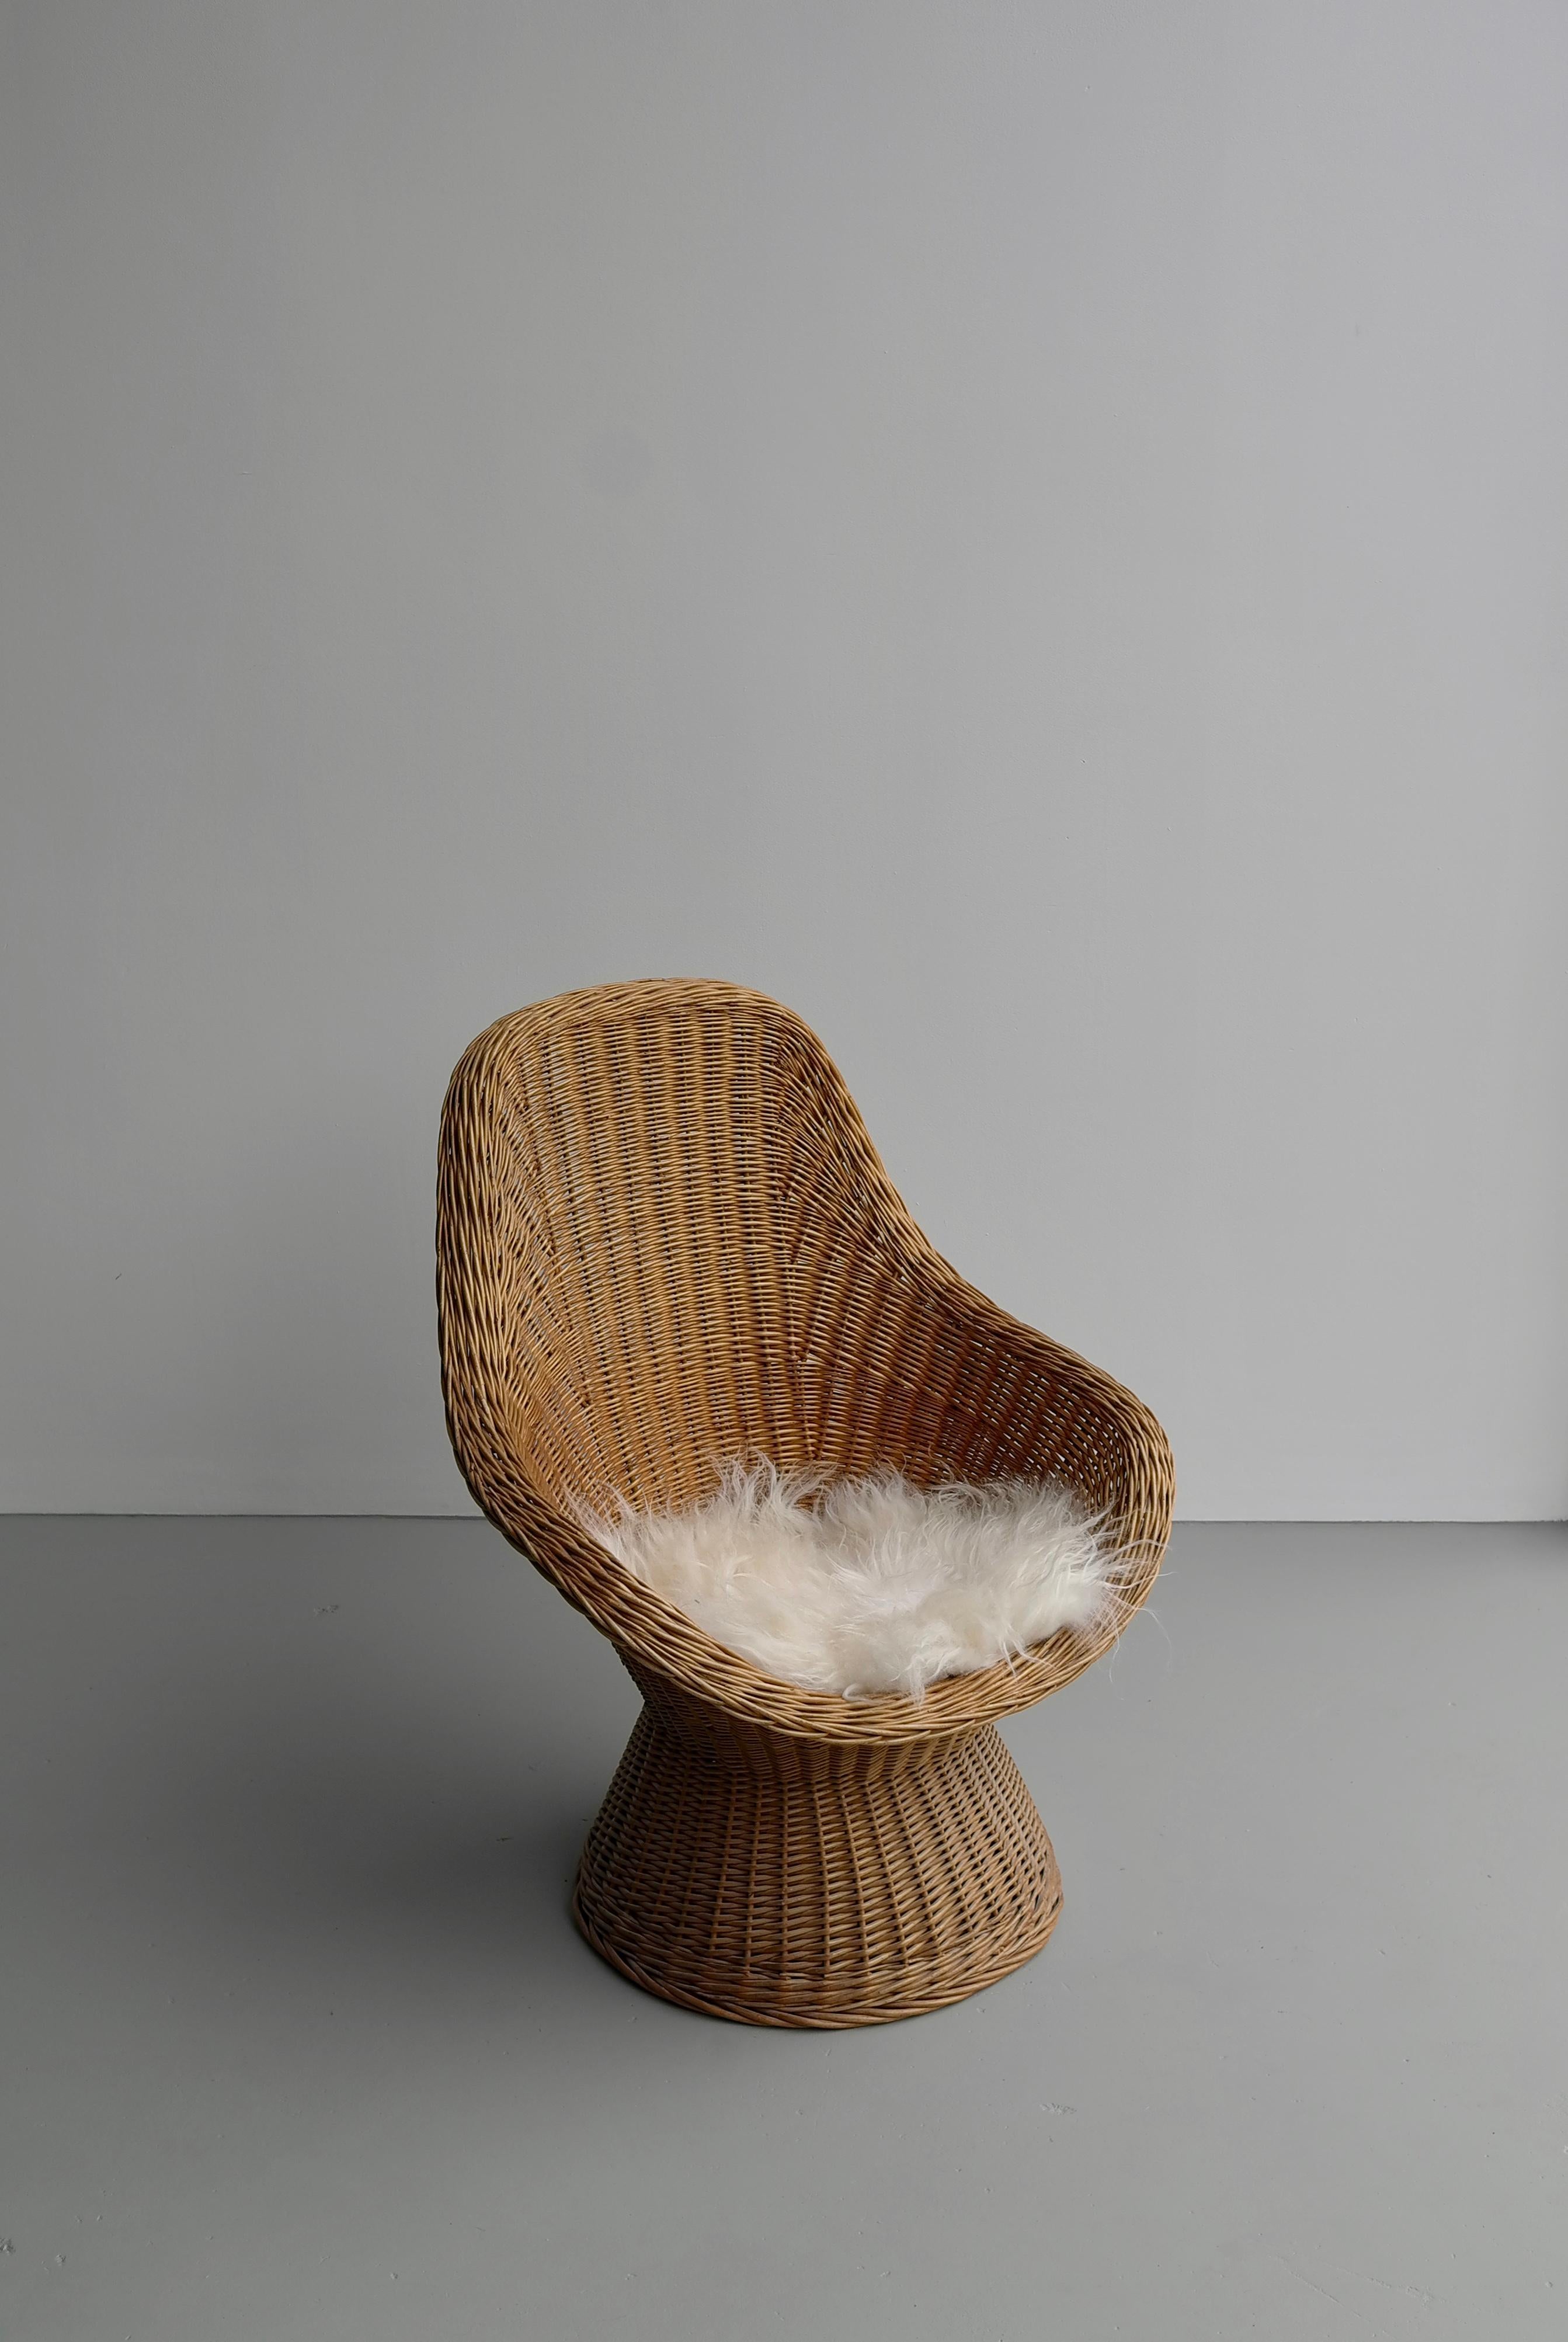 Hand twined blond willow lounge chair with white sheep wool pillow.